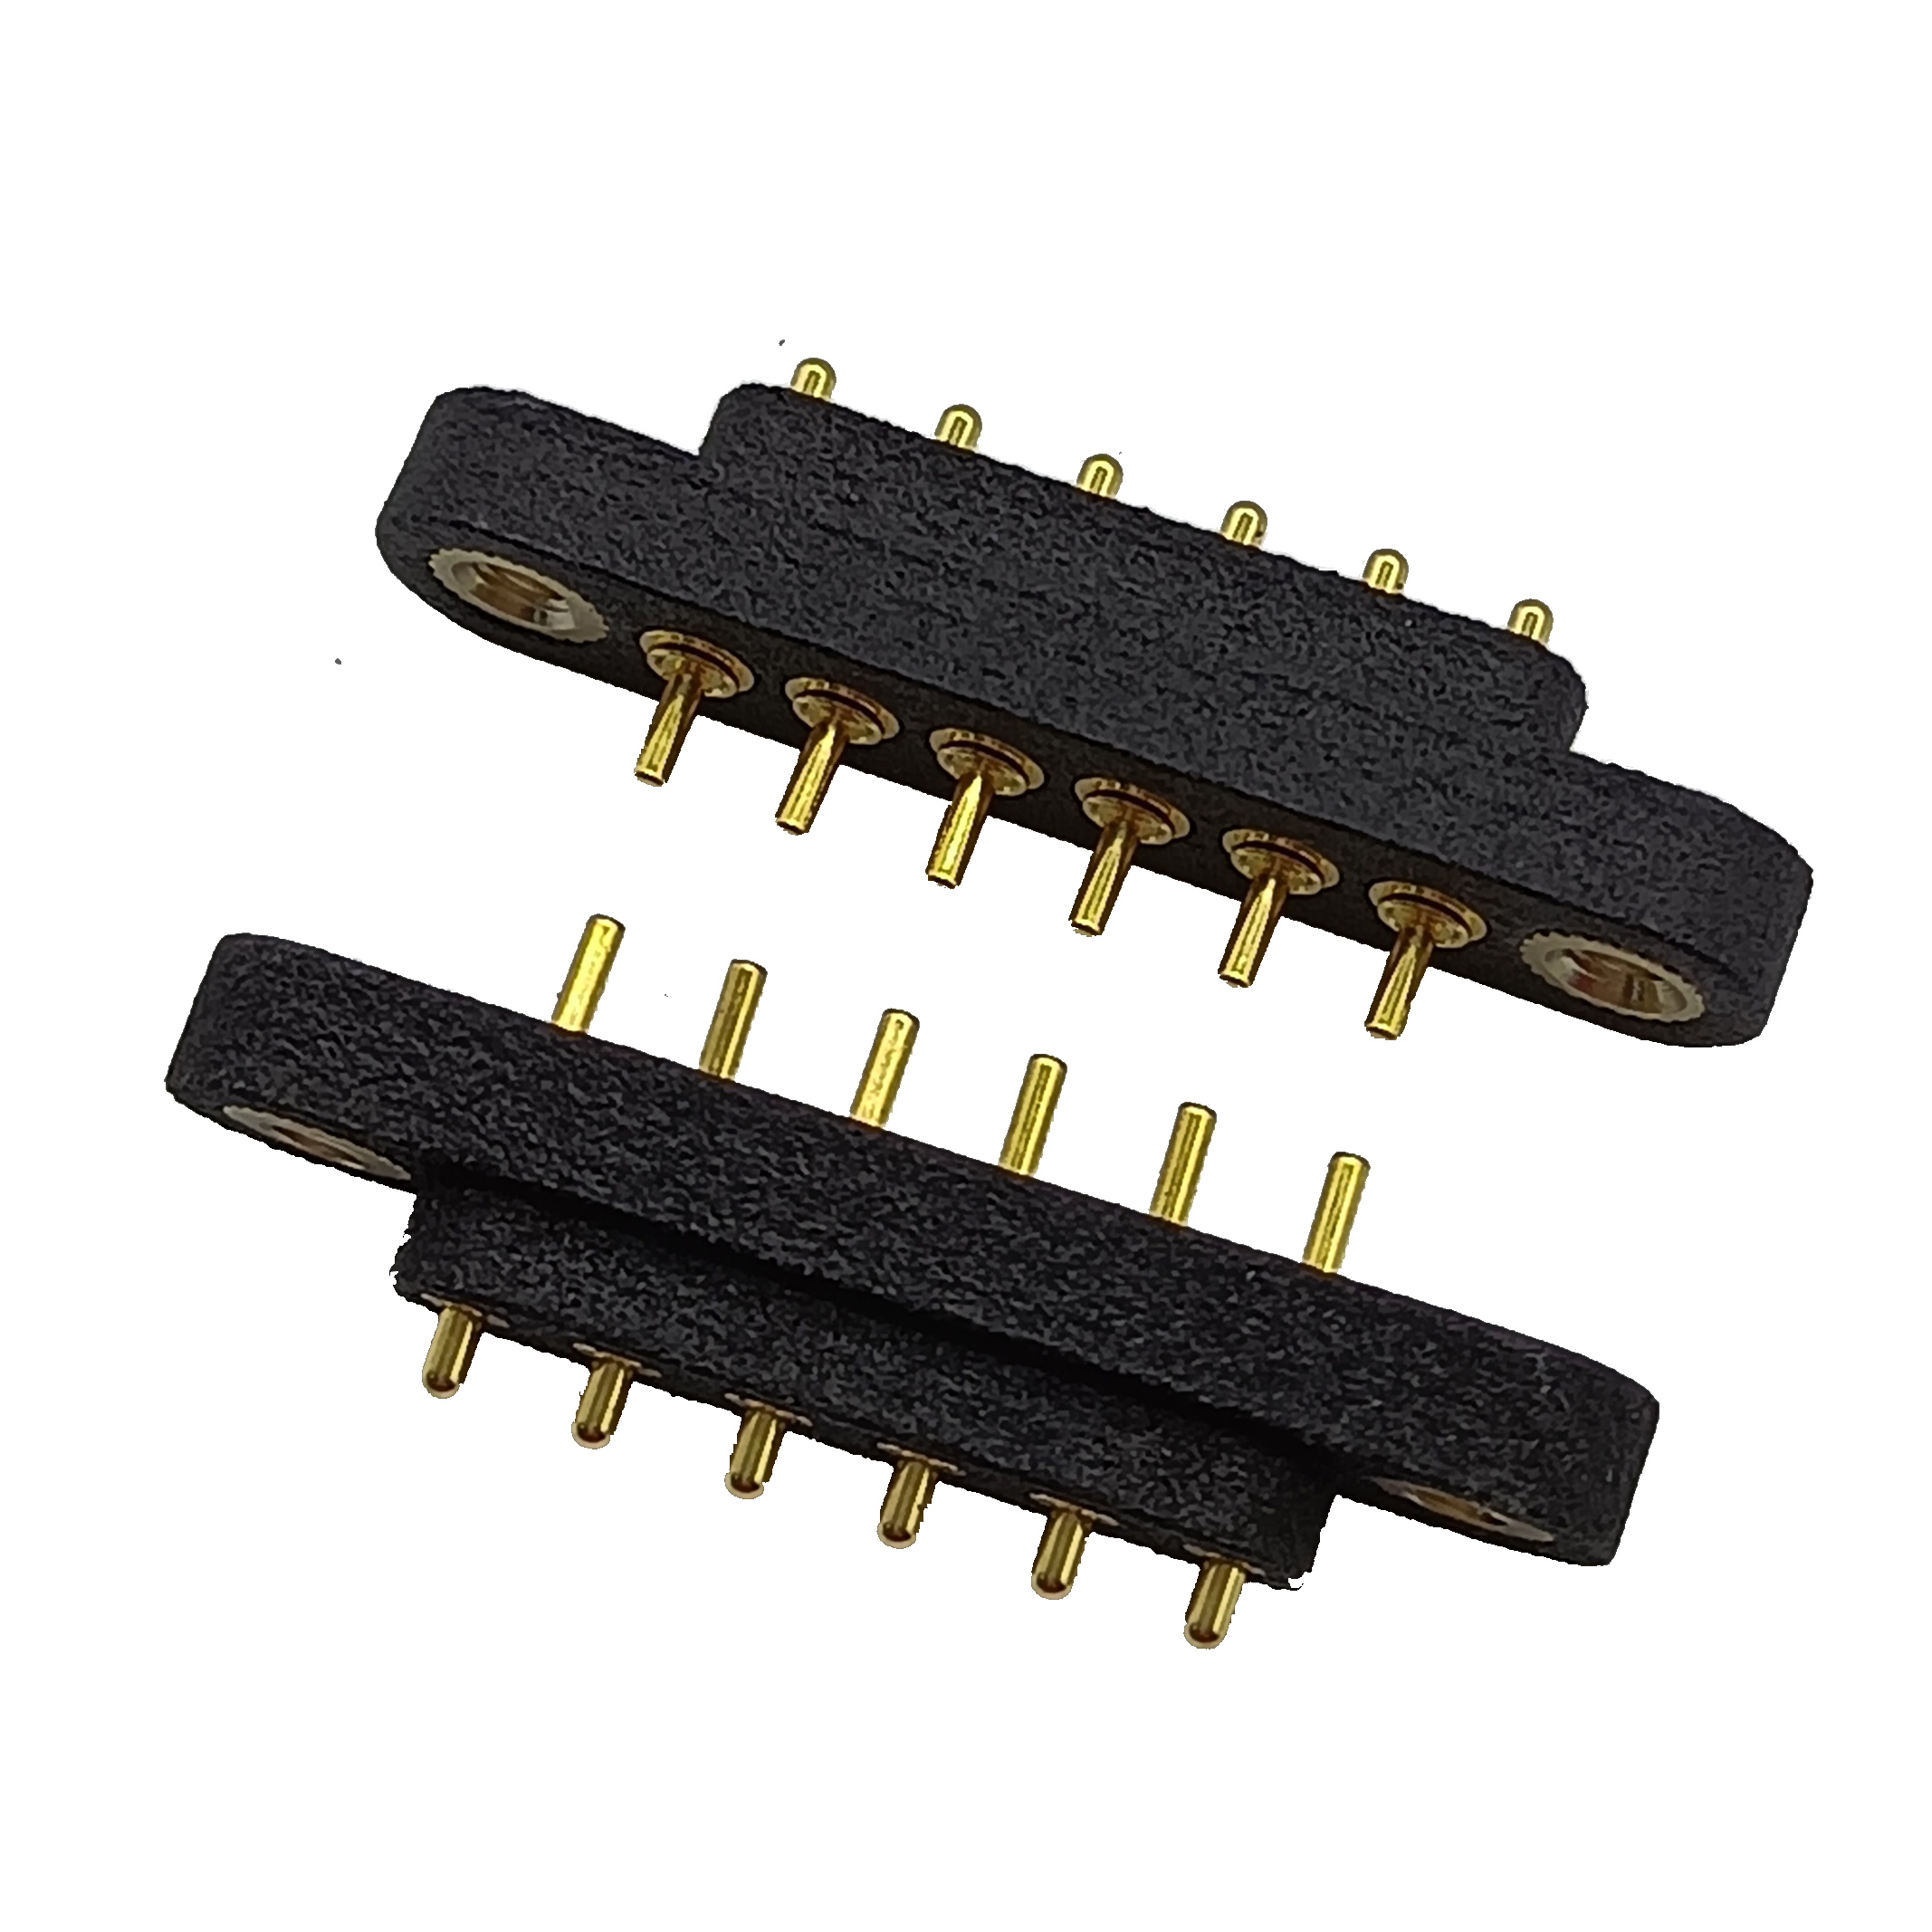 Magnetic pogo pin connectors provide high-speed and stable data transmission. 